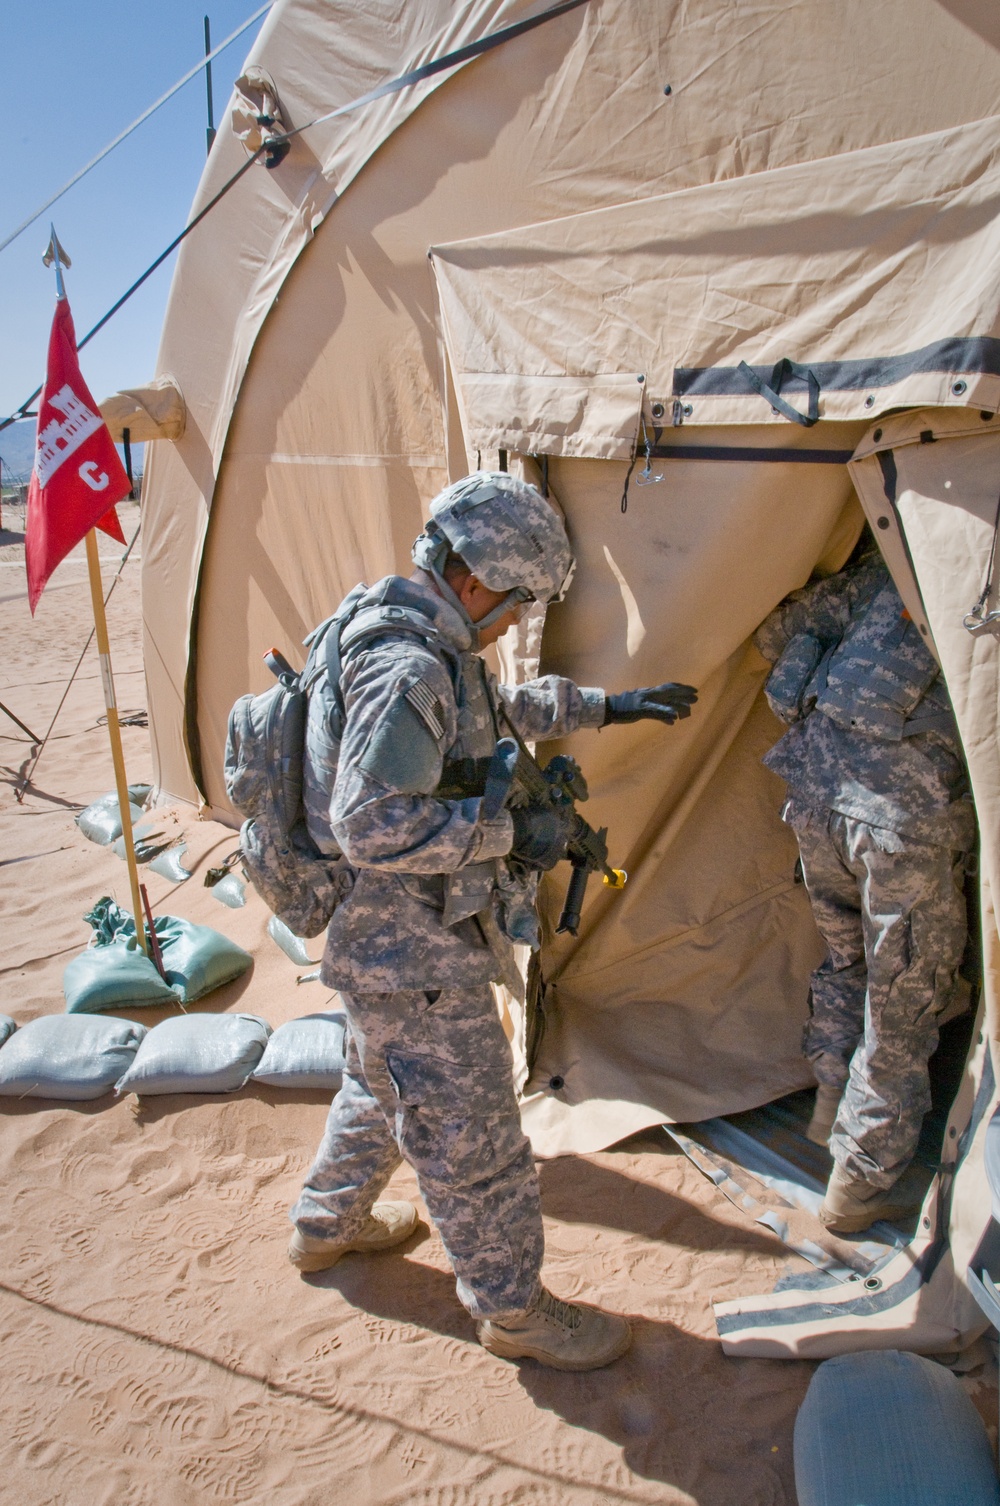 DVIDS - News - New Army tents to improve climate control in hot